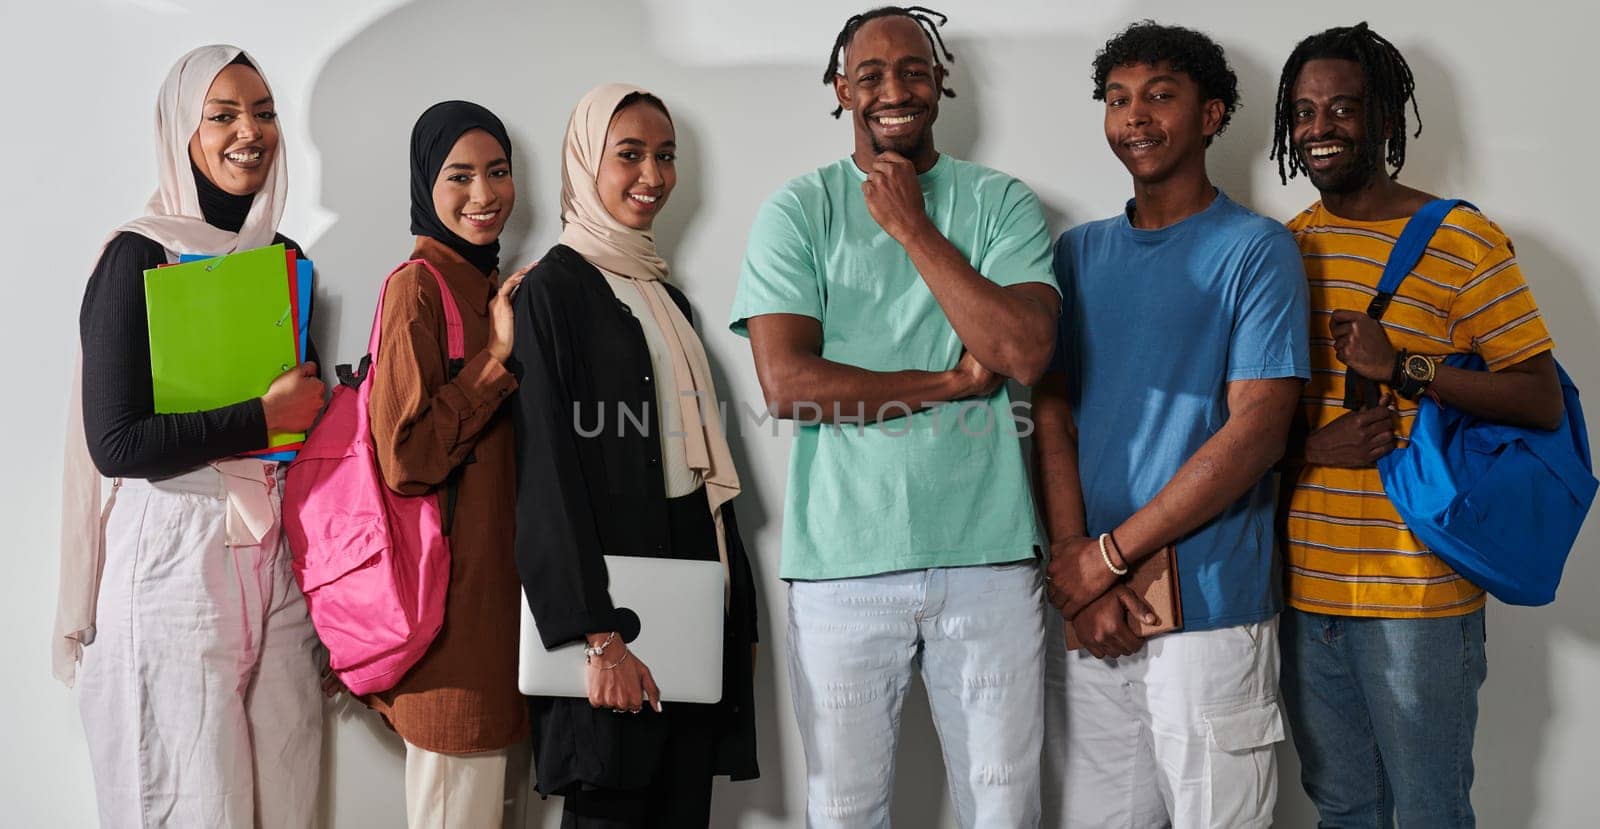 In a vibrant display of educational diversity, a group of students strikes a pose against a clean white background, holding backpacks, laptops, and tablets, symbolizing a blend of modern technology, unity, and cultural inclusivity in their academic journey.